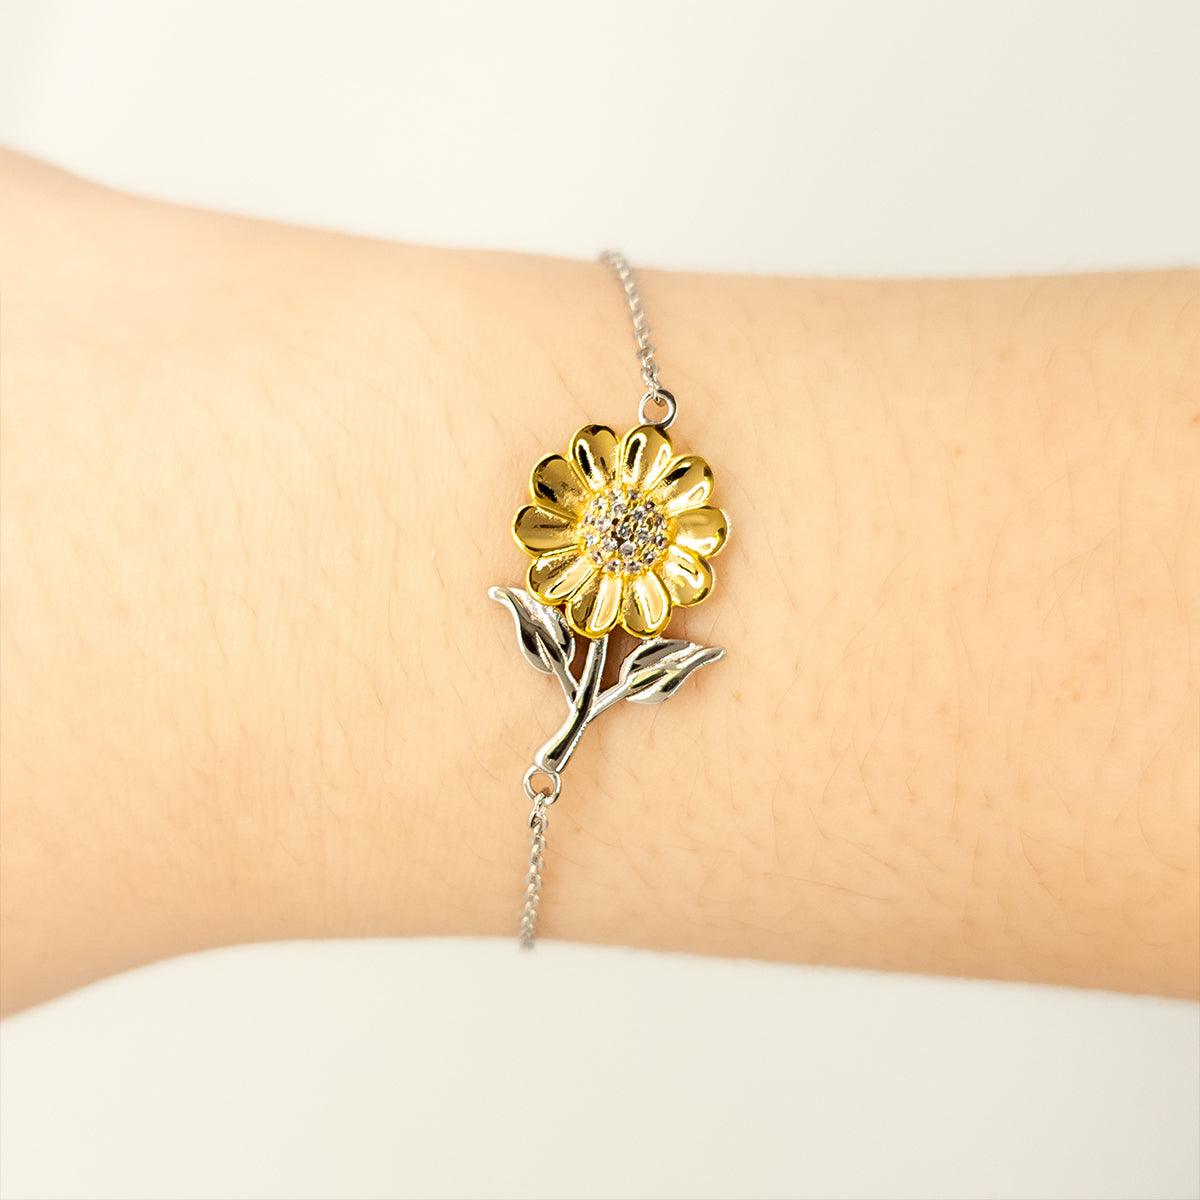 Crane Operator Sunflower Bracelet - Thanks for being who you are - Birthday Christmas Jewelry Gifts Coworkers Colleague Boss - Mallard Moon Gift Shop